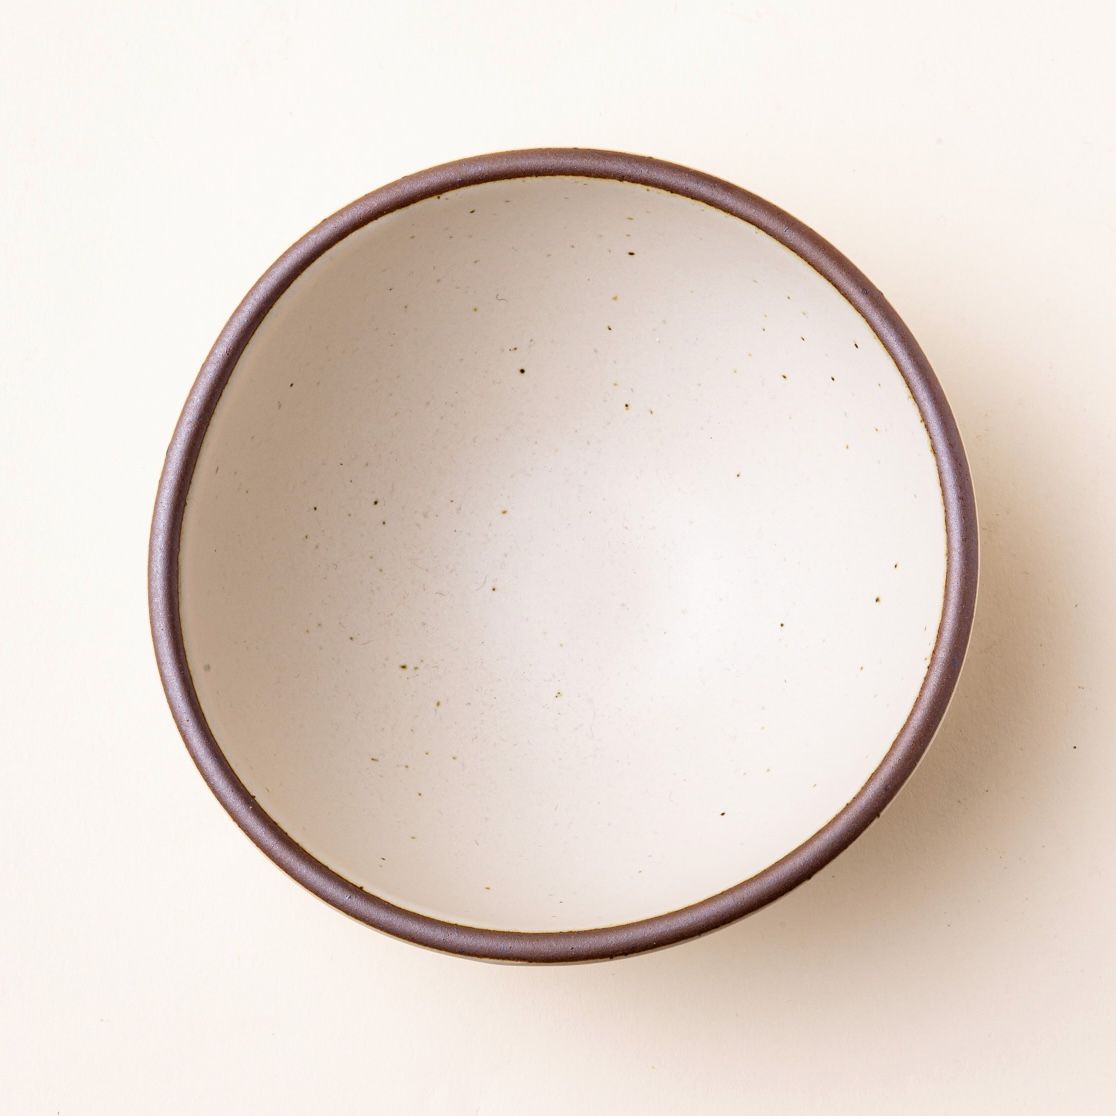 Overhead view of a ceramic bowl in an off-white color with warping.